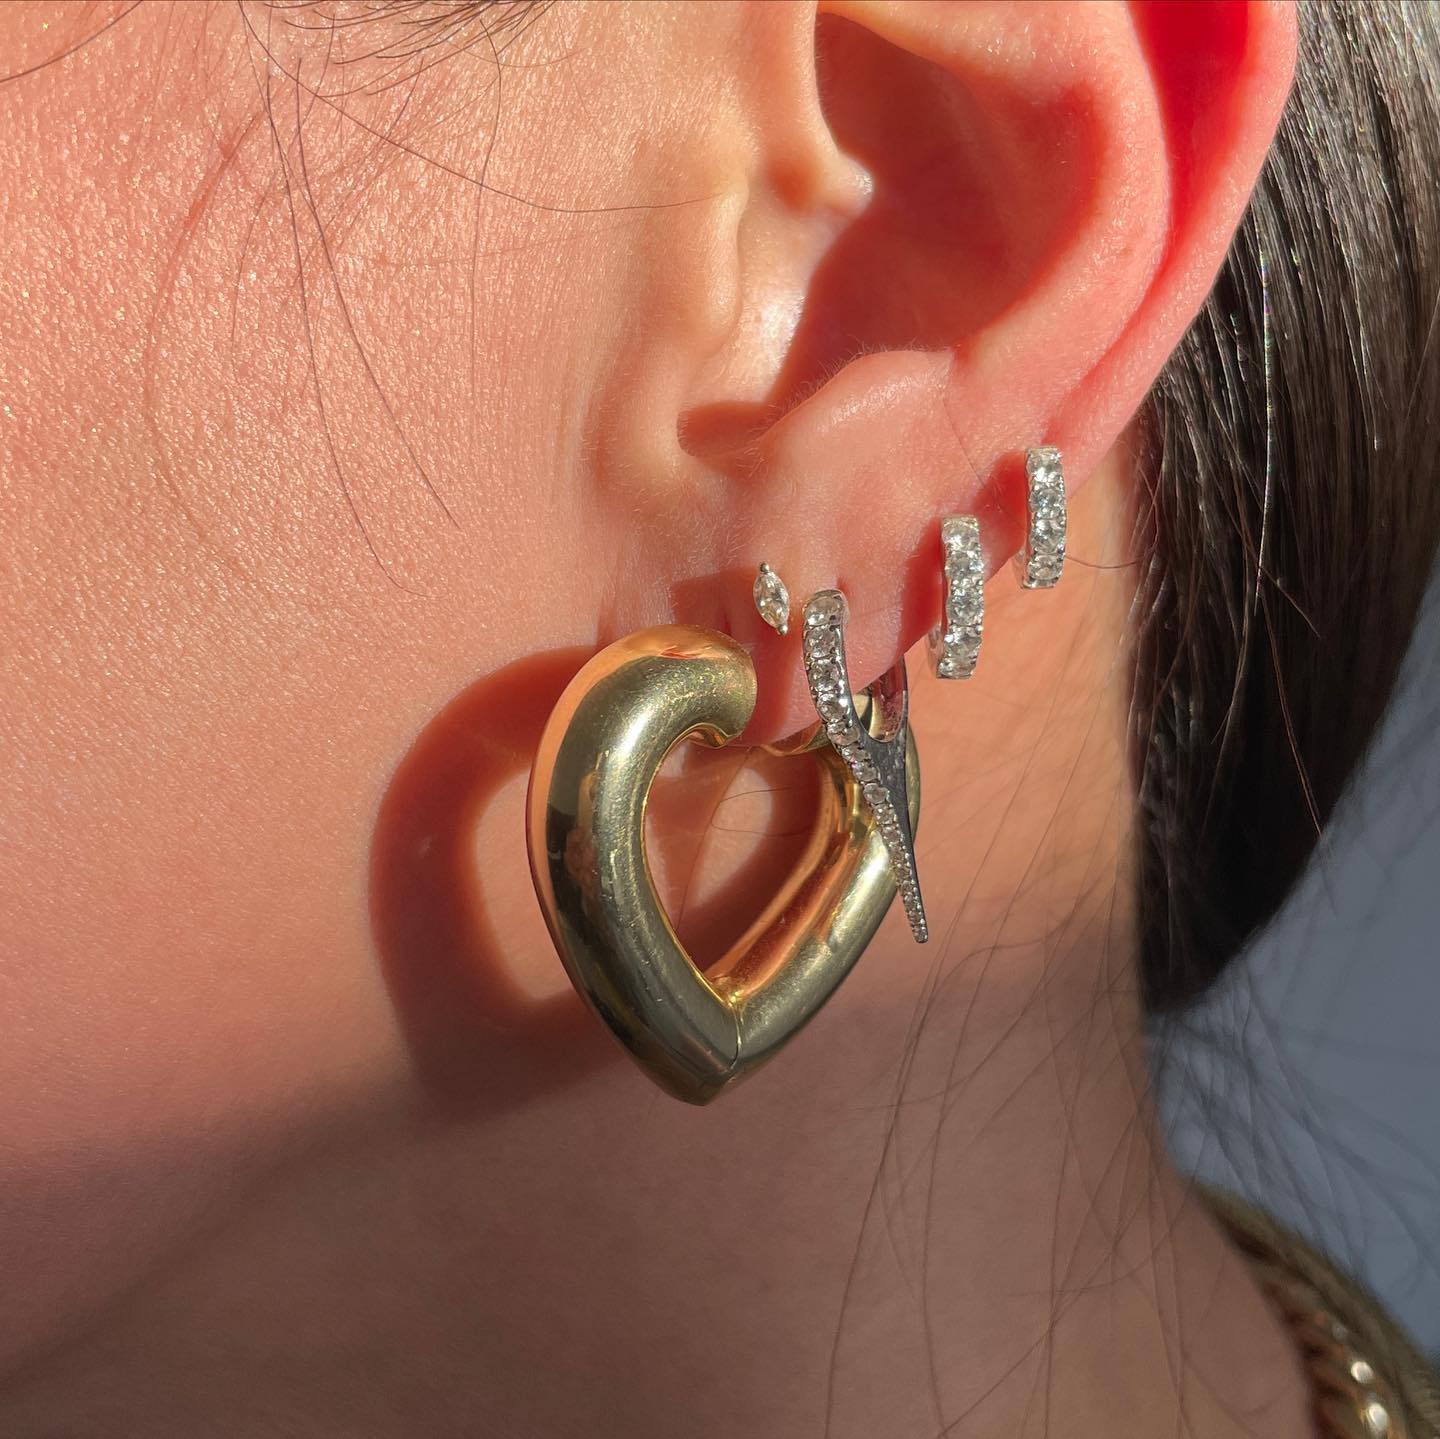 Close-up of a person's ear wearing multiple earrings, including a large gold heart-shaped hoop and several small, sparkling, silver studs and hoops.